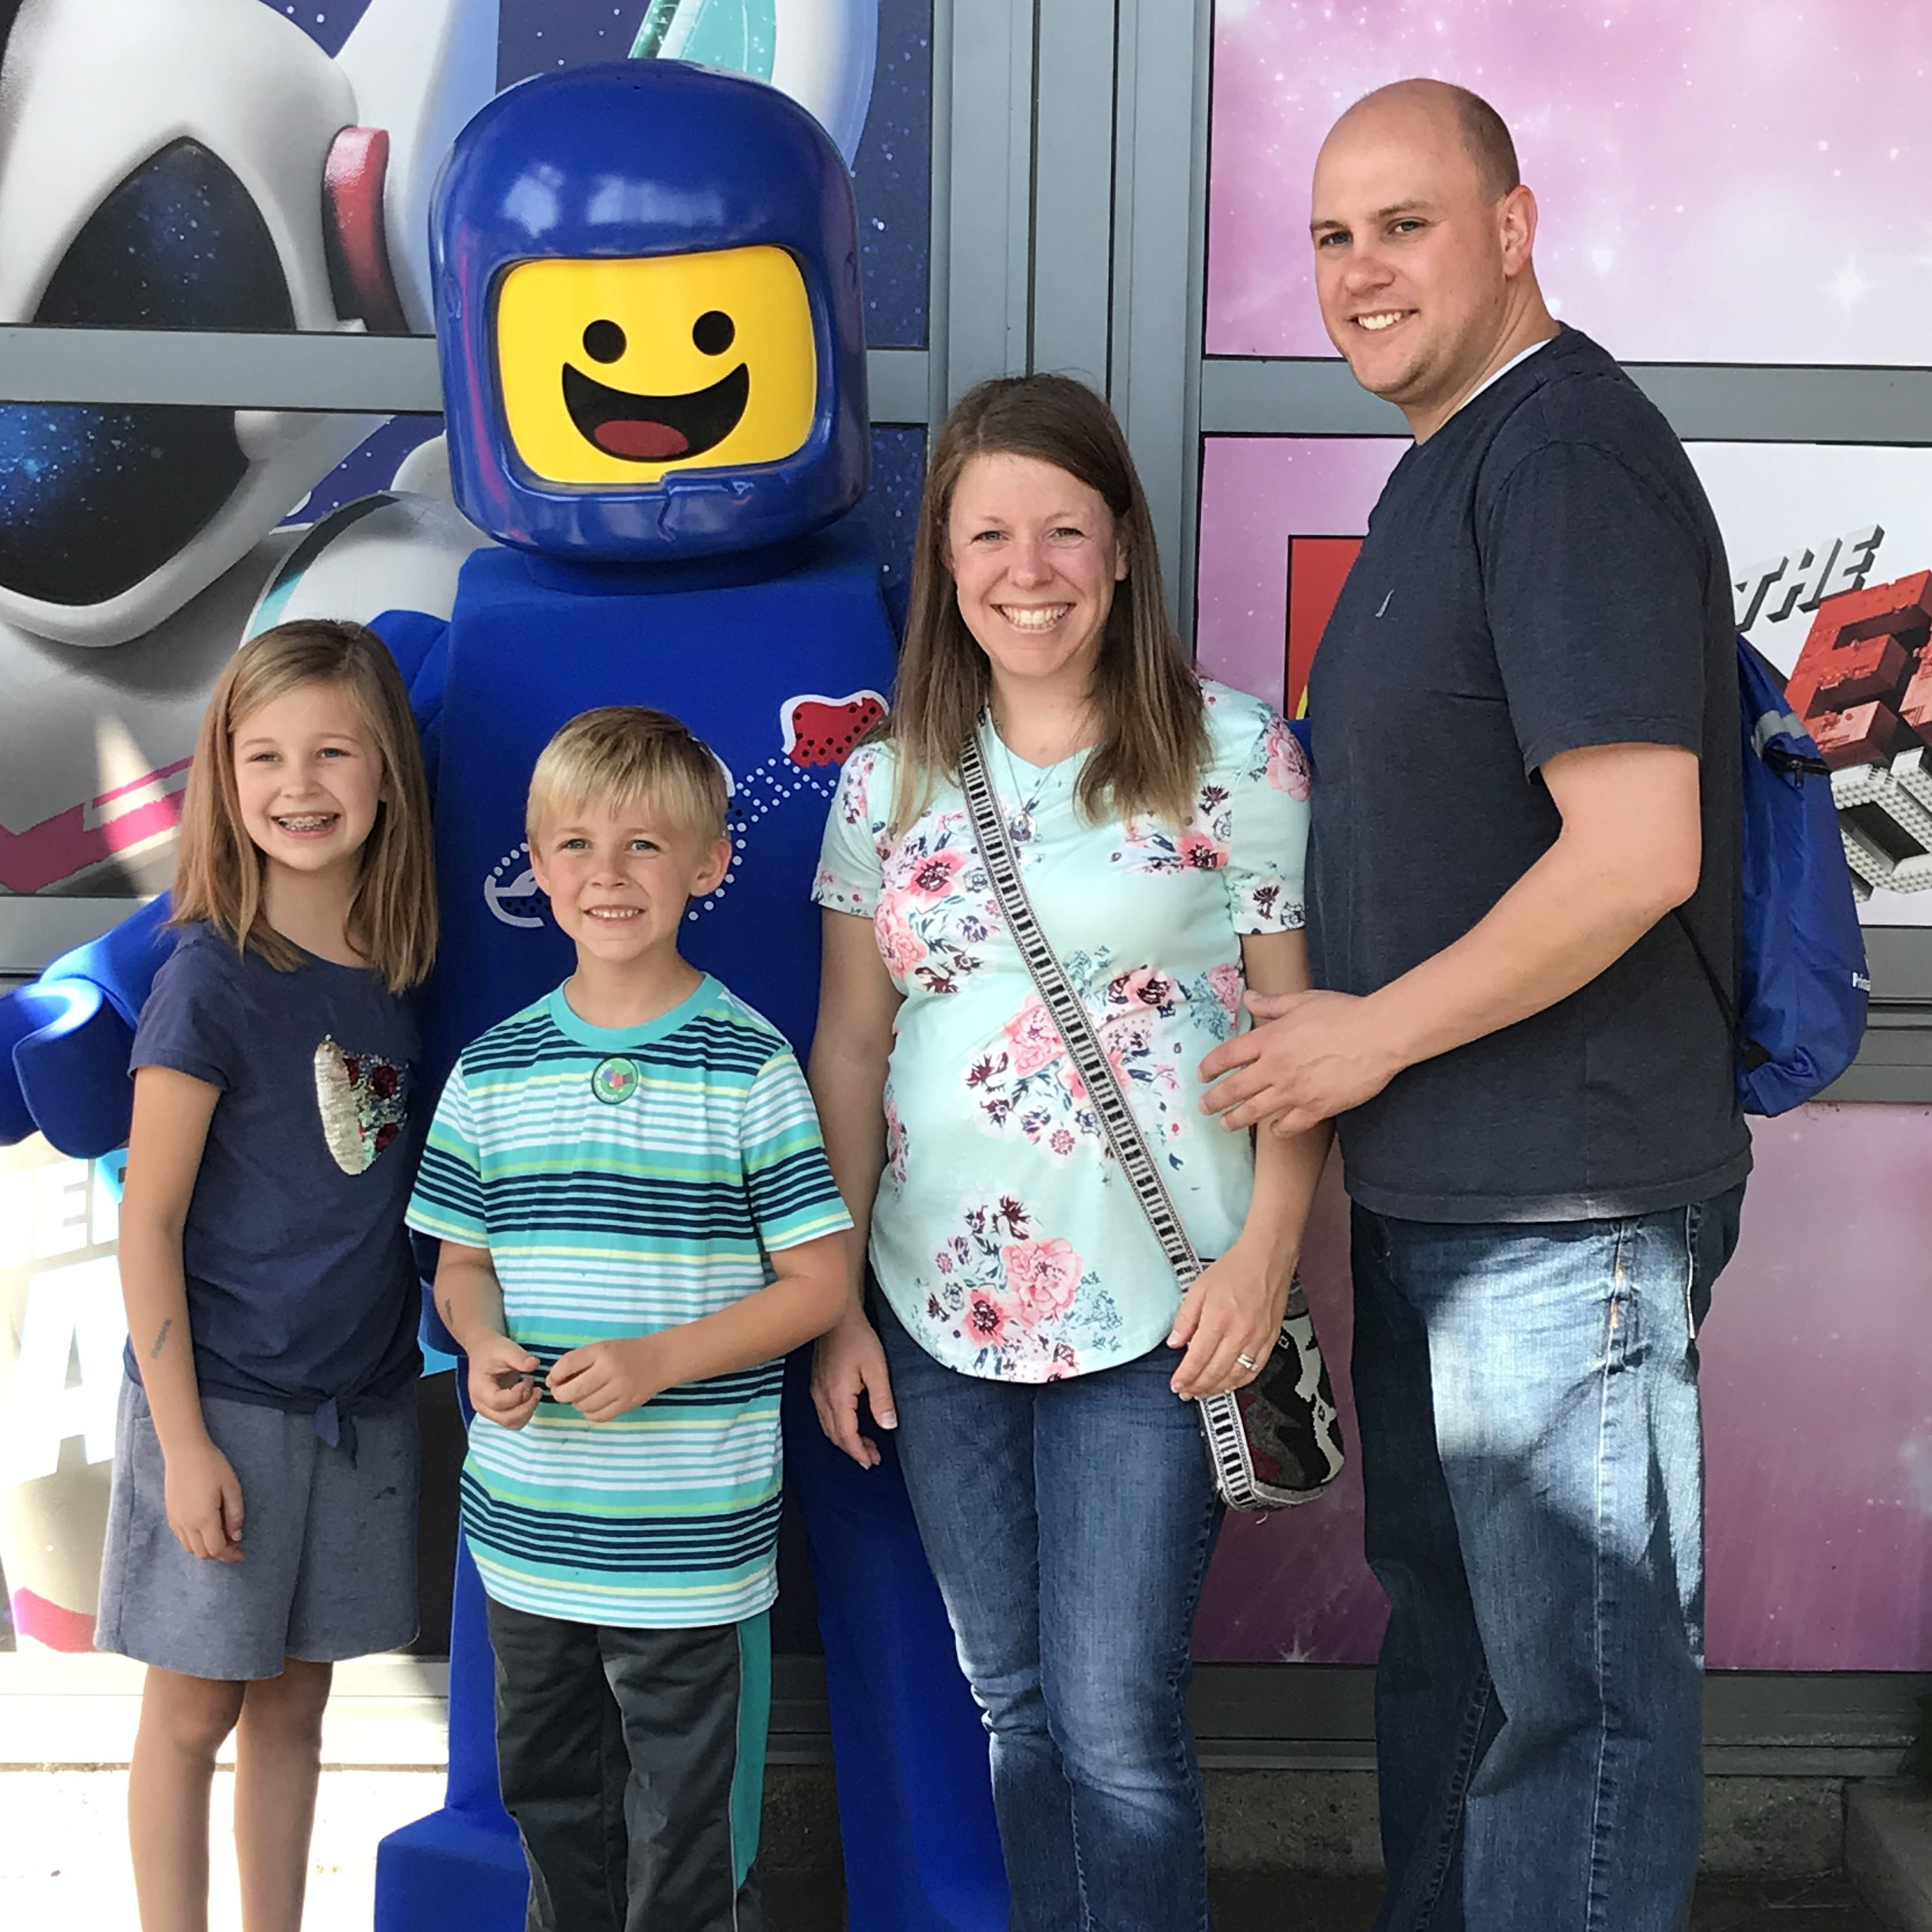 A trip to Legoland was just what we needed.  Legos are pretty awesome!